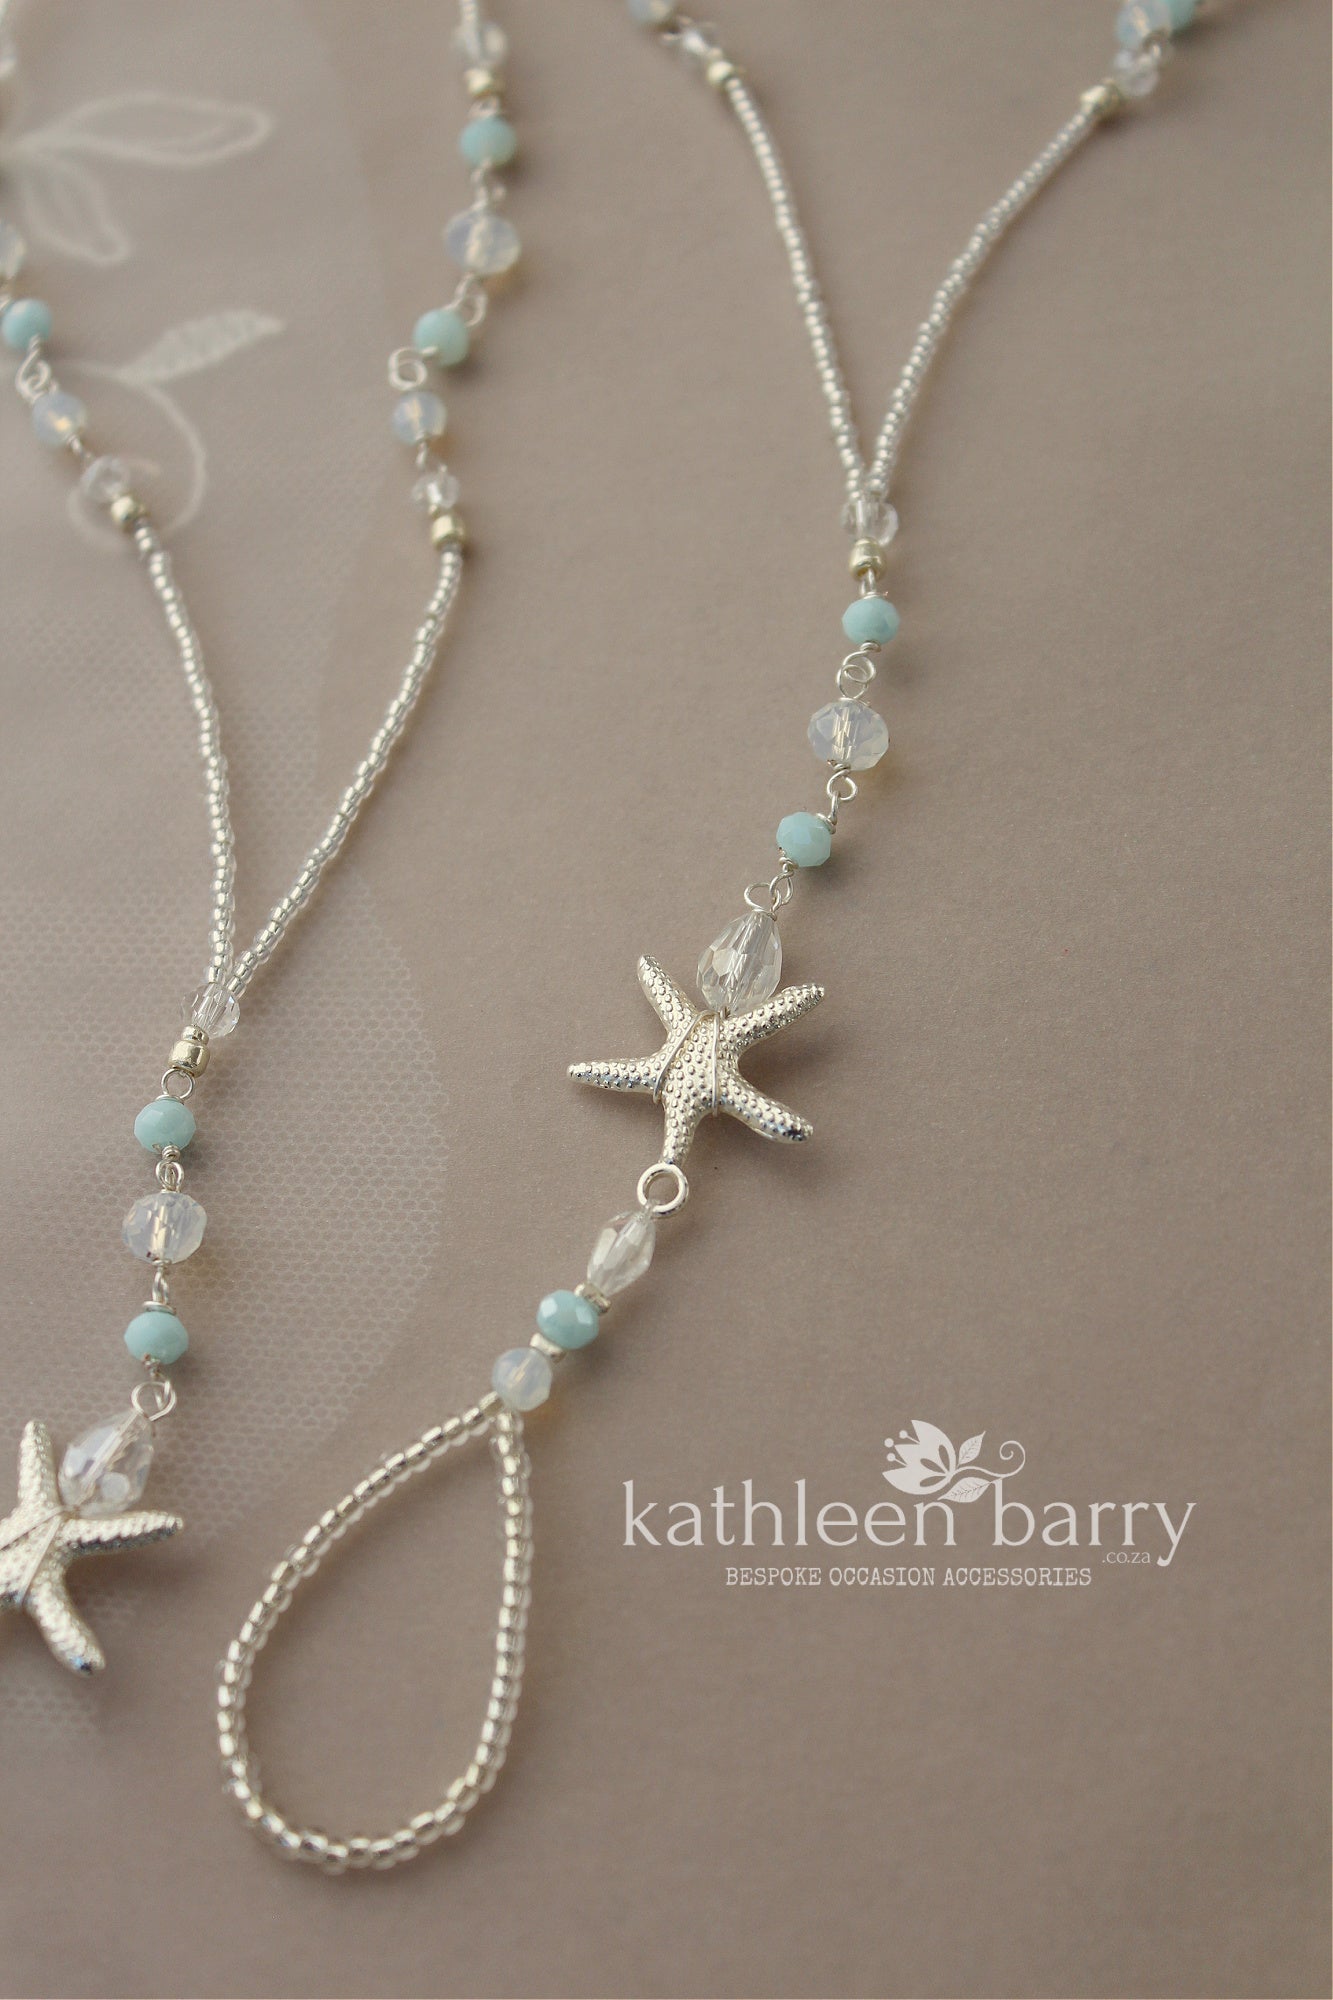 Cherize starfish Barefoot Jewellery Sandals for Brides and bridal party - (Pair) Available in Rose gold, gold or silver